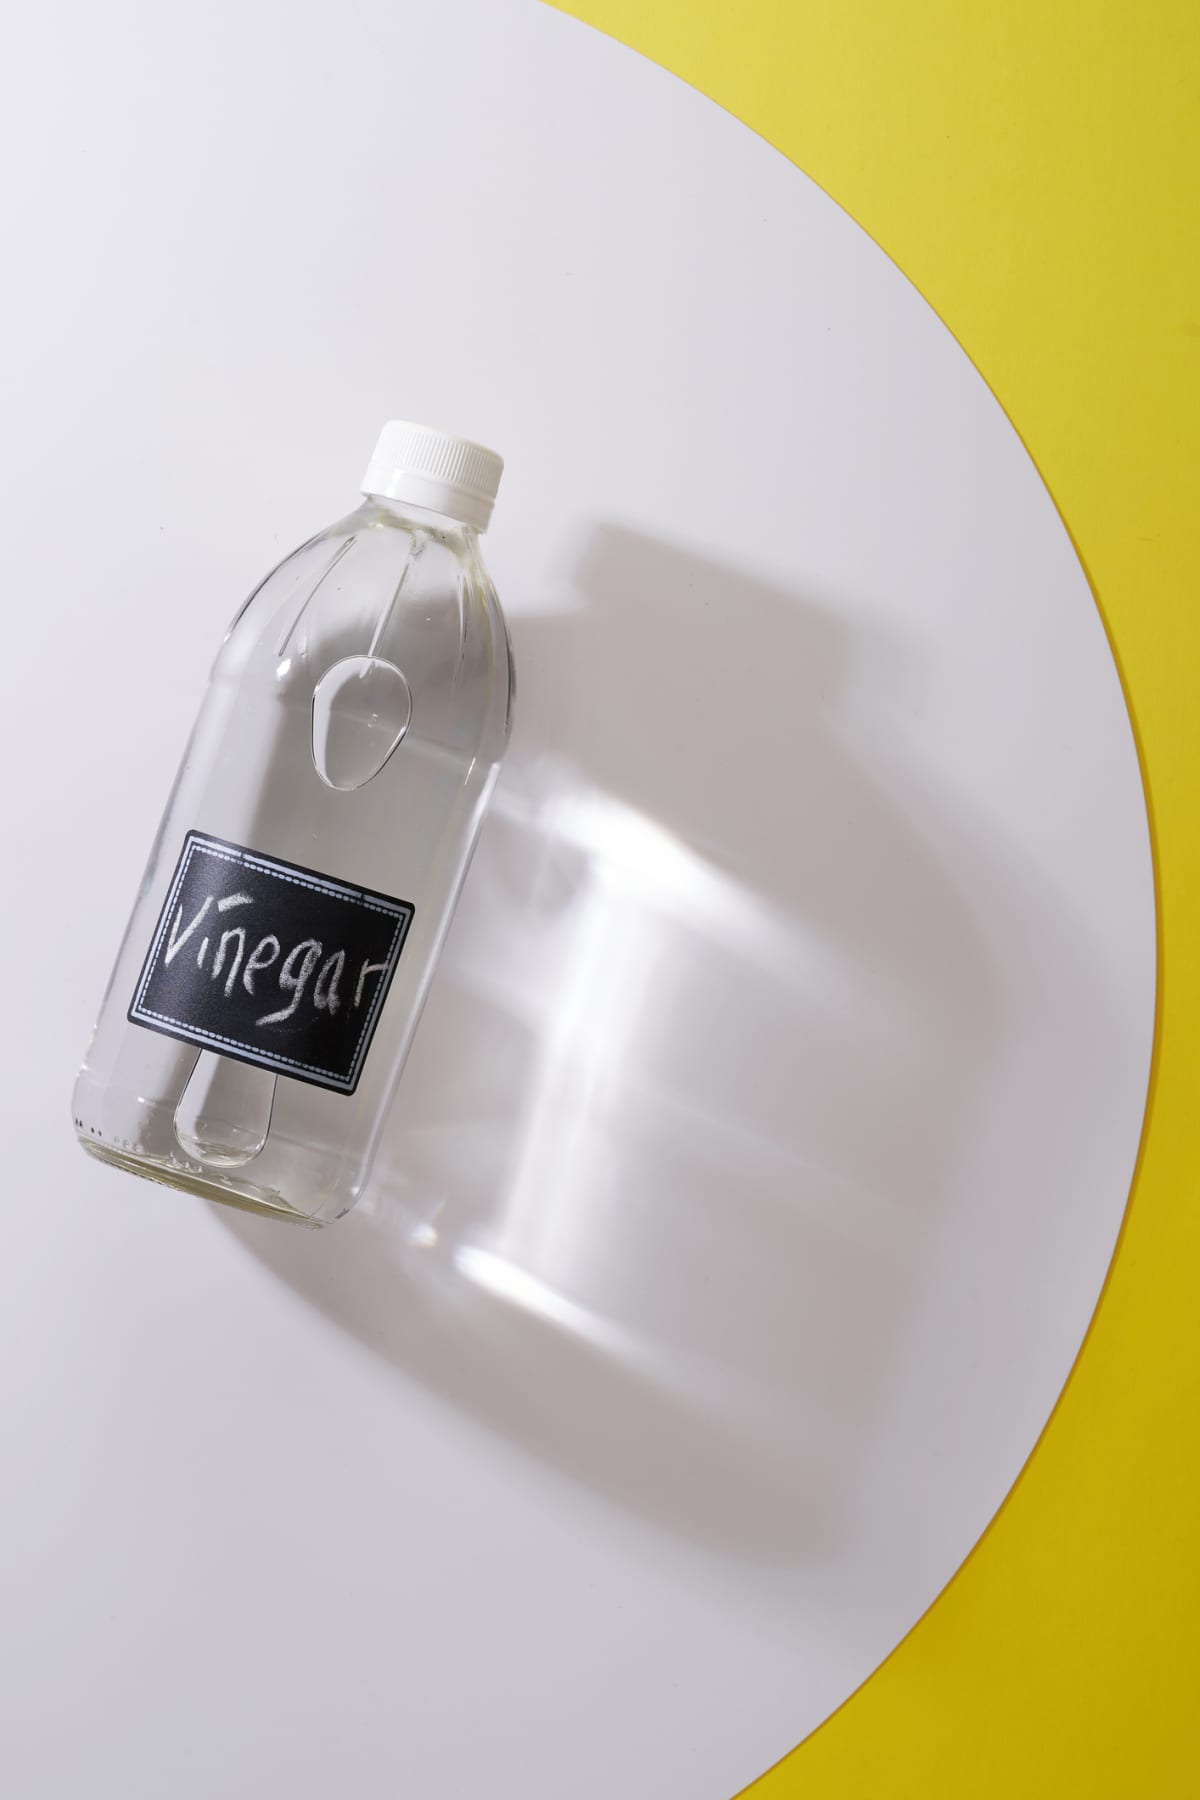 A bottle of vinegar against a white and yellow background.